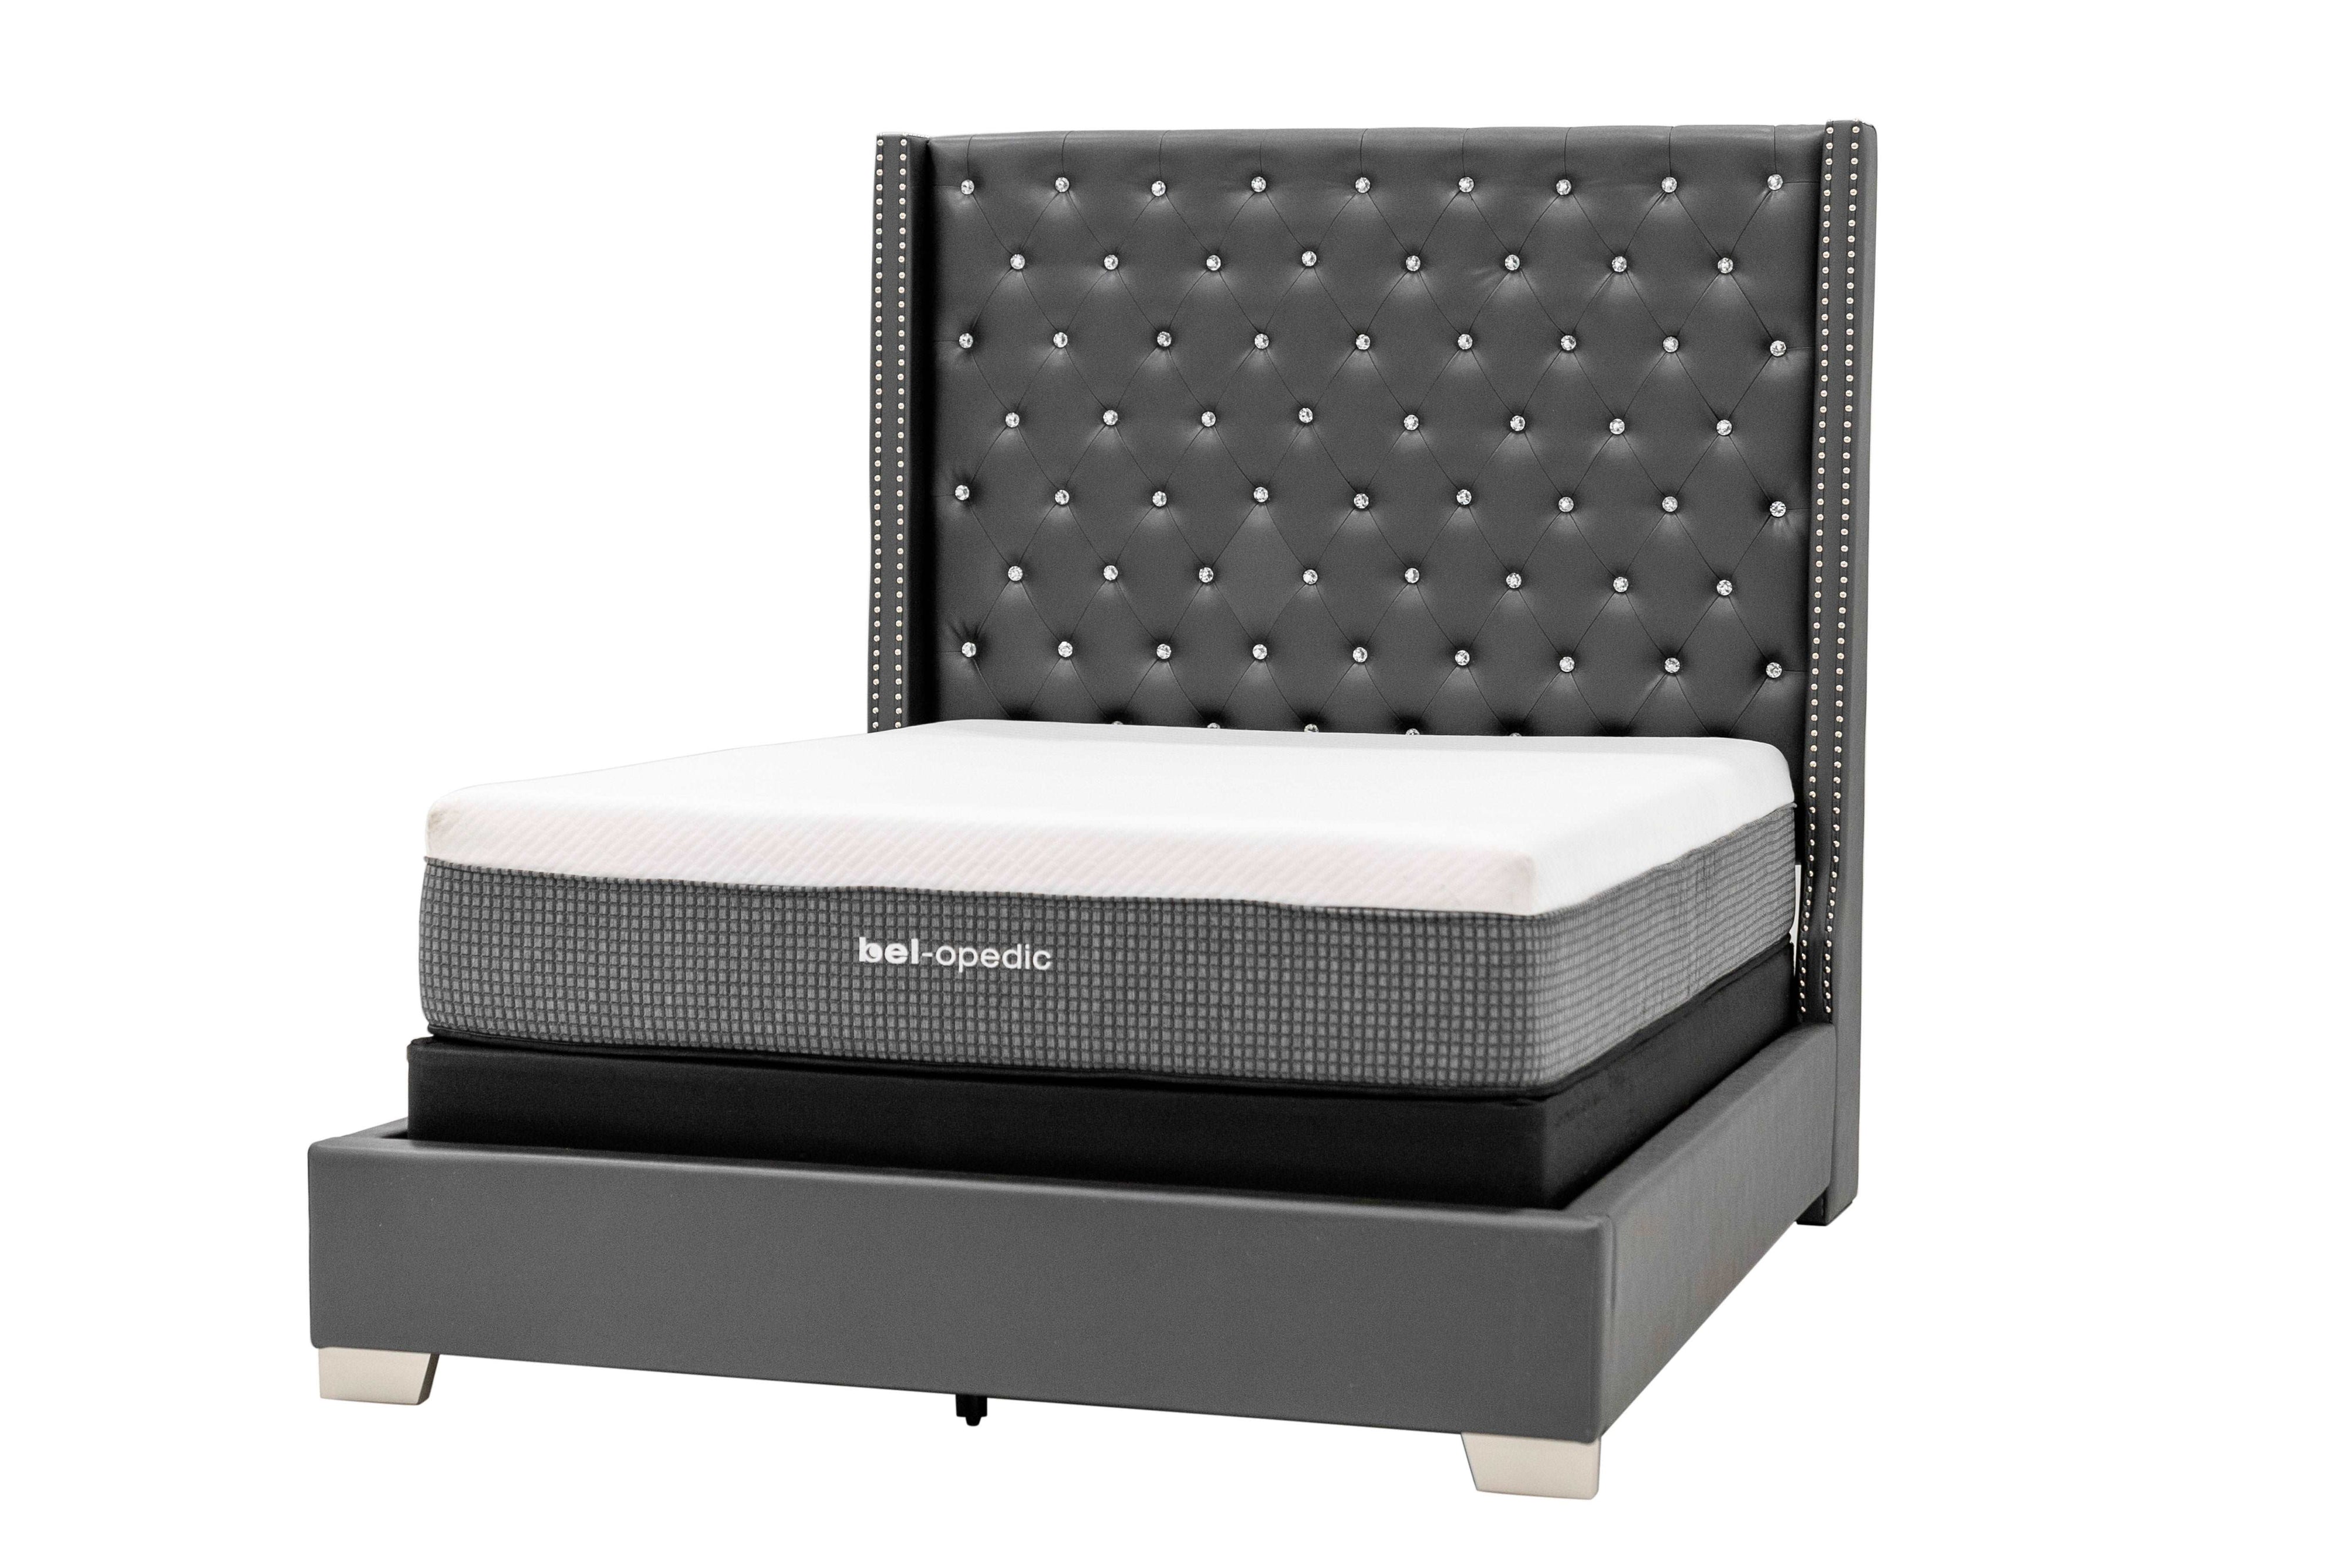 3 PIECE KING BED